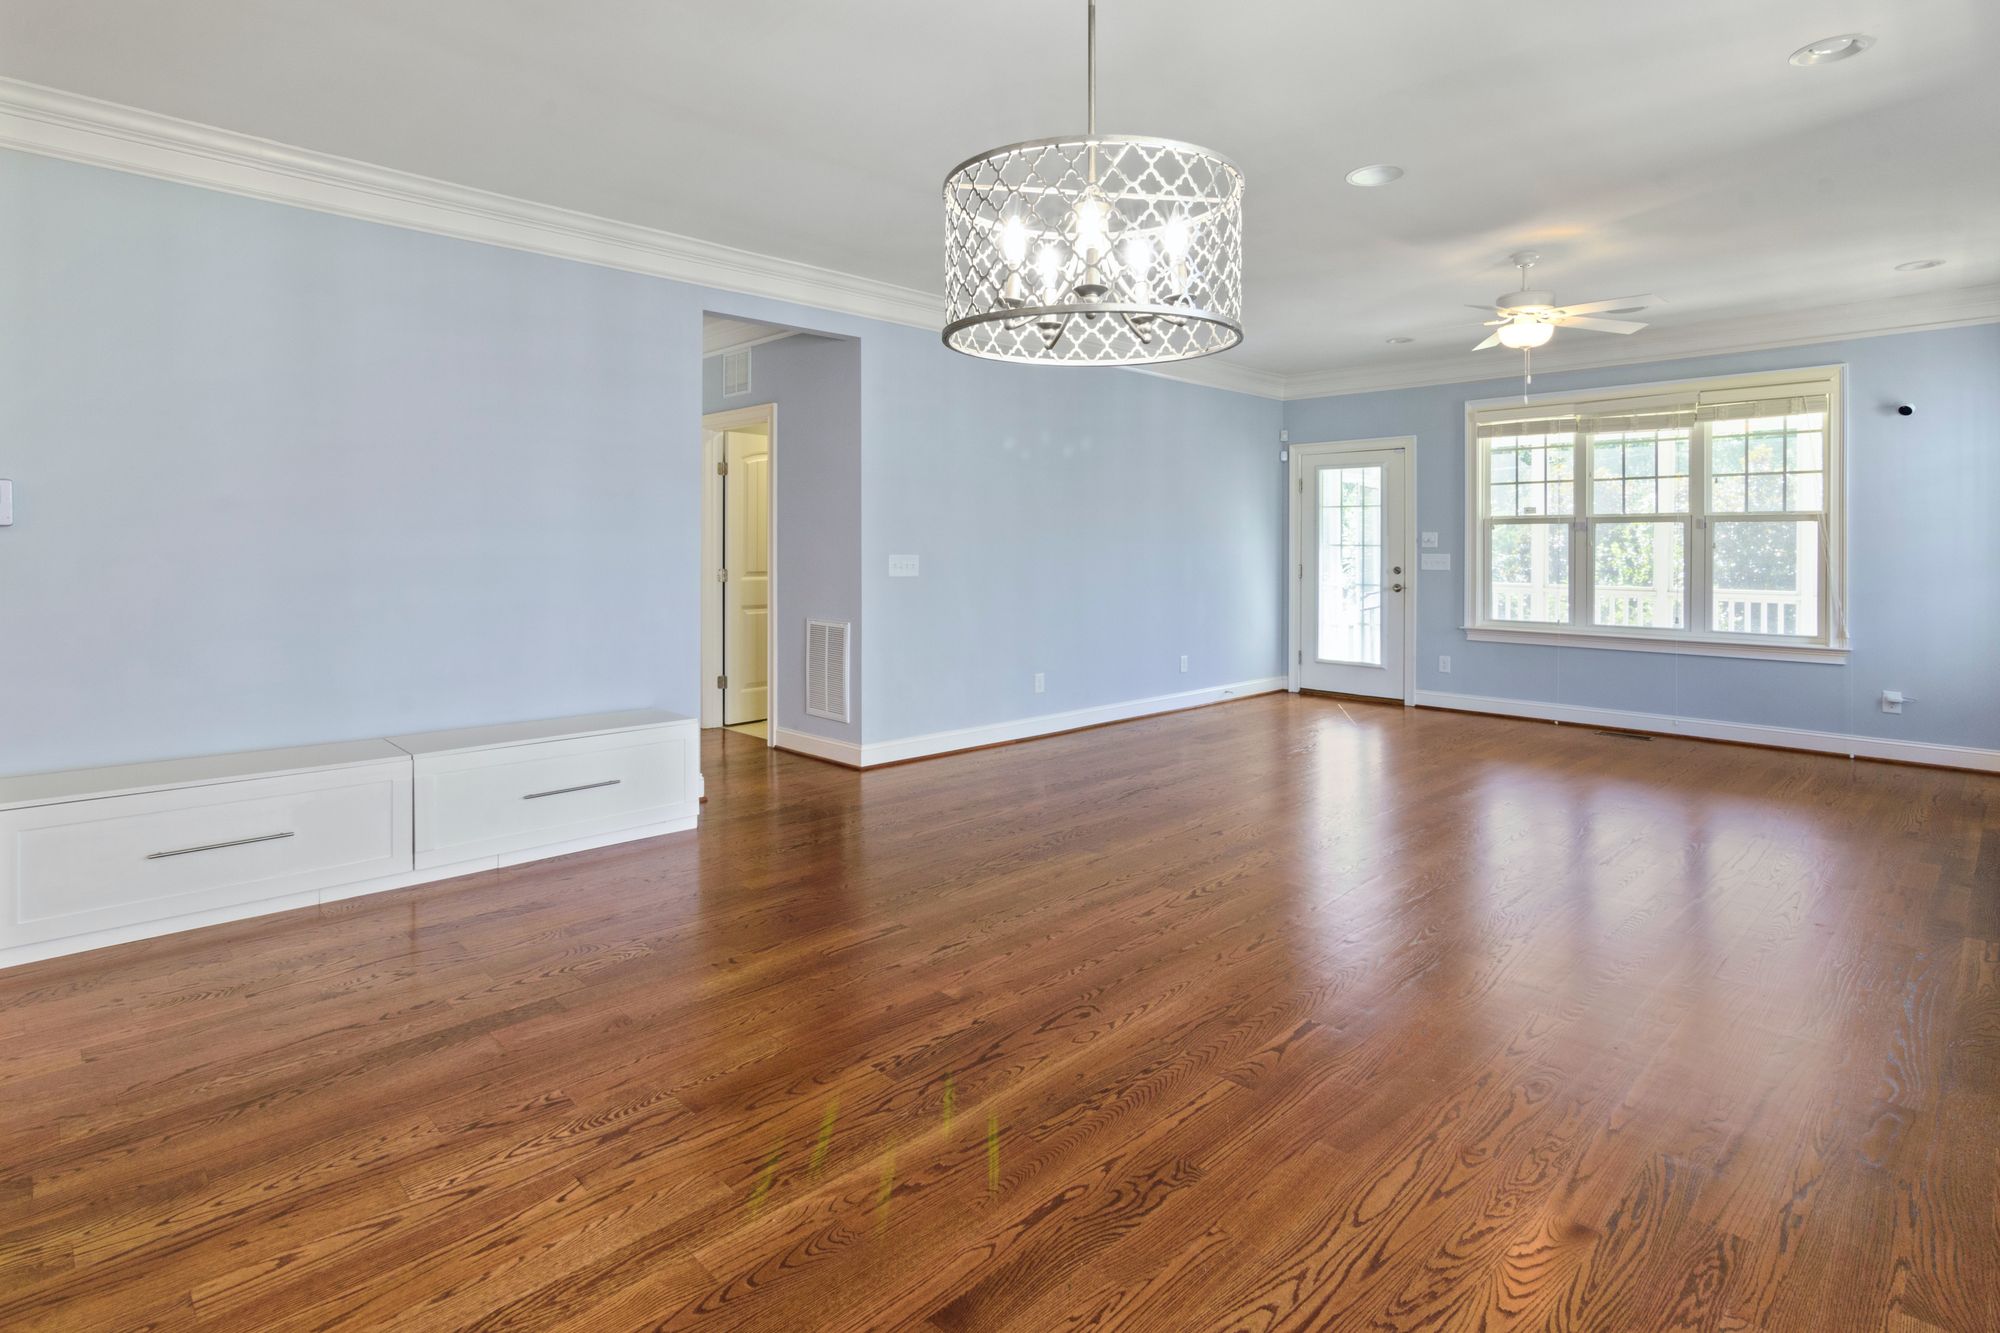 How Often Should You Have Your Hardwood Floors Sanded And Refinished?